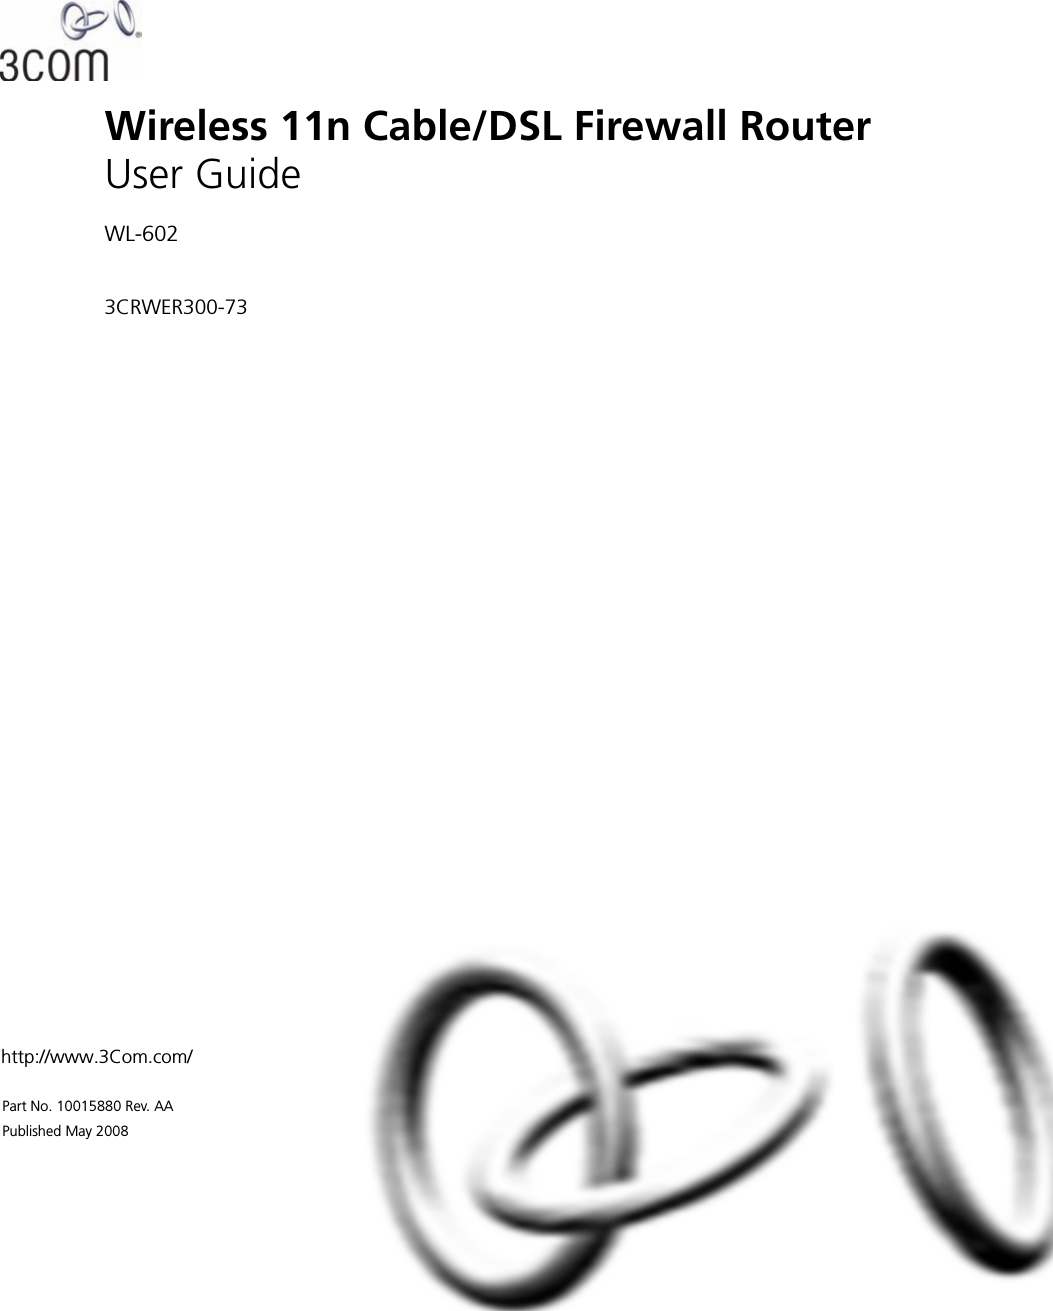 http://www.3Com.com/Part No. 10015880 Rev. AAPublished May 2008Wireless 11n Cable/DSL Firewall RouterUser GuideWL-6023CRWER300-73